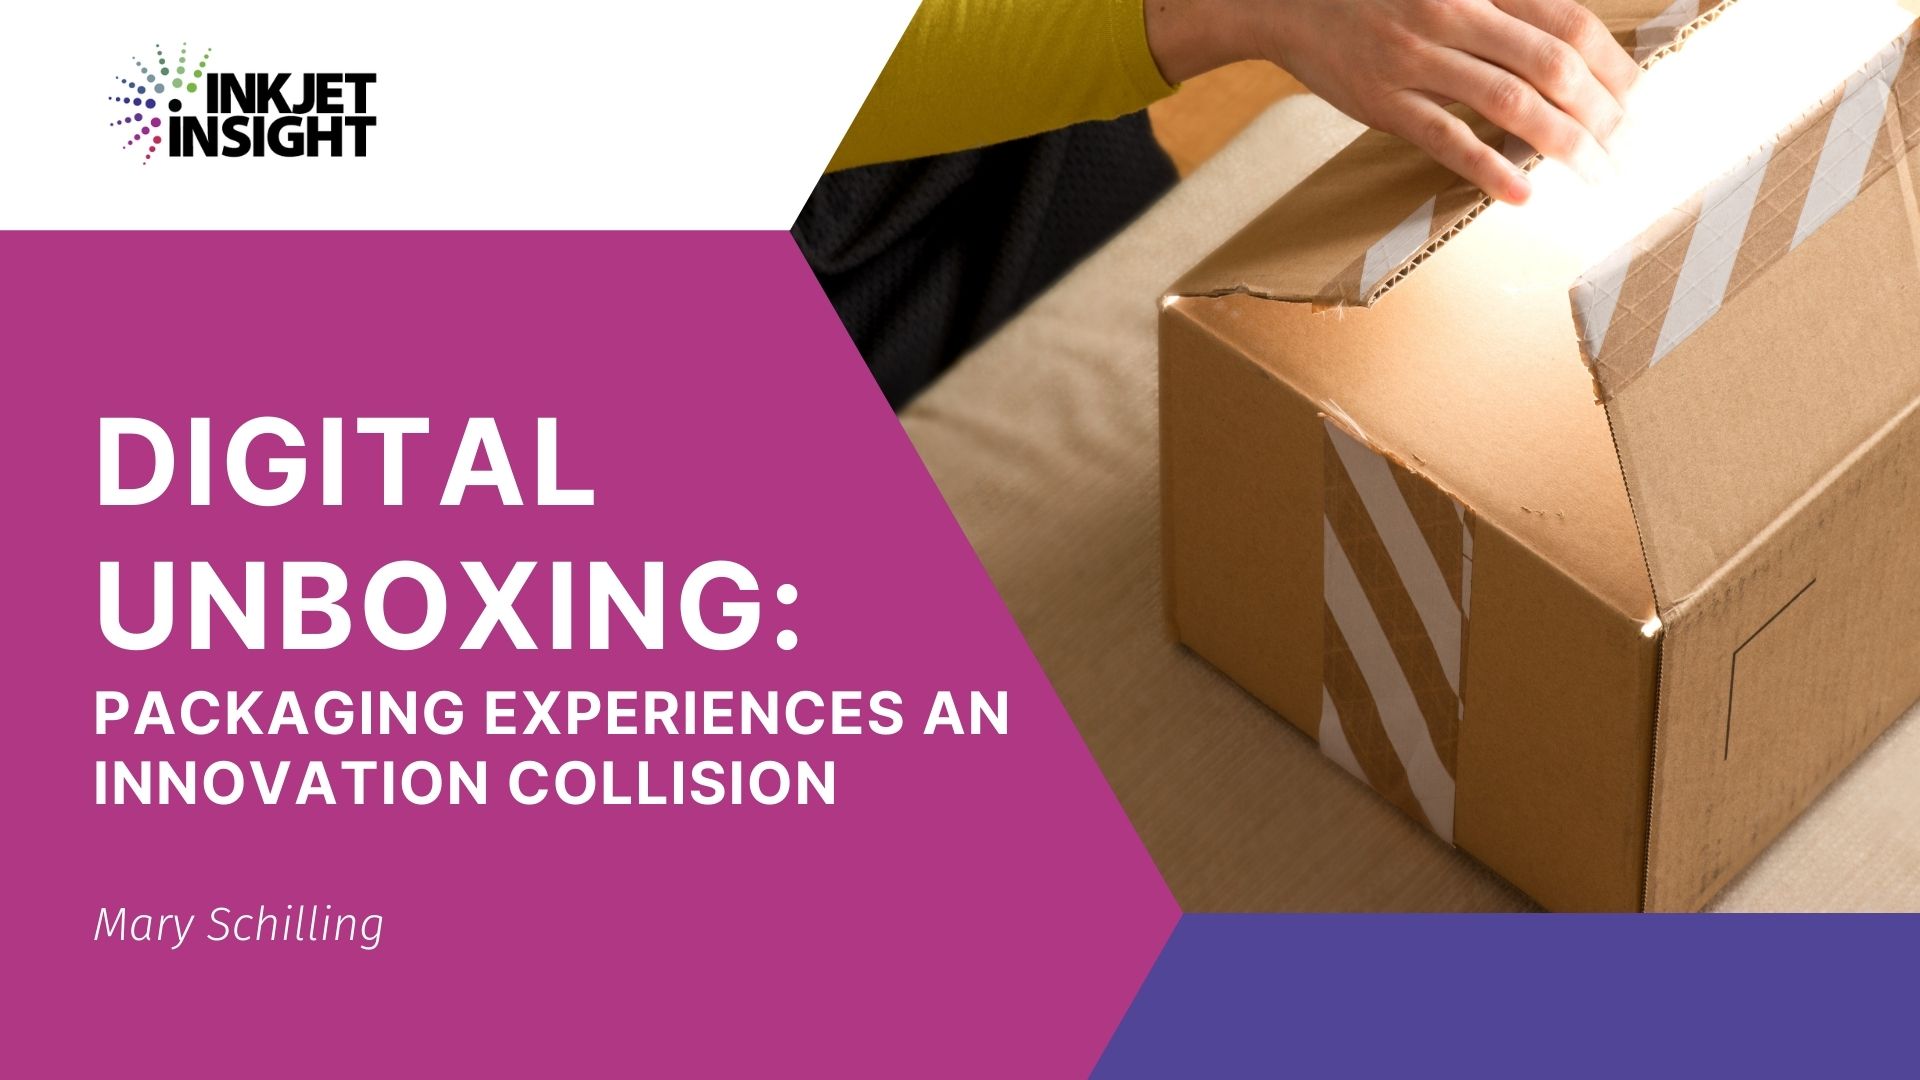 Featured image for “Digital Unboxing: Packaging Experiences an Innovation Collision”